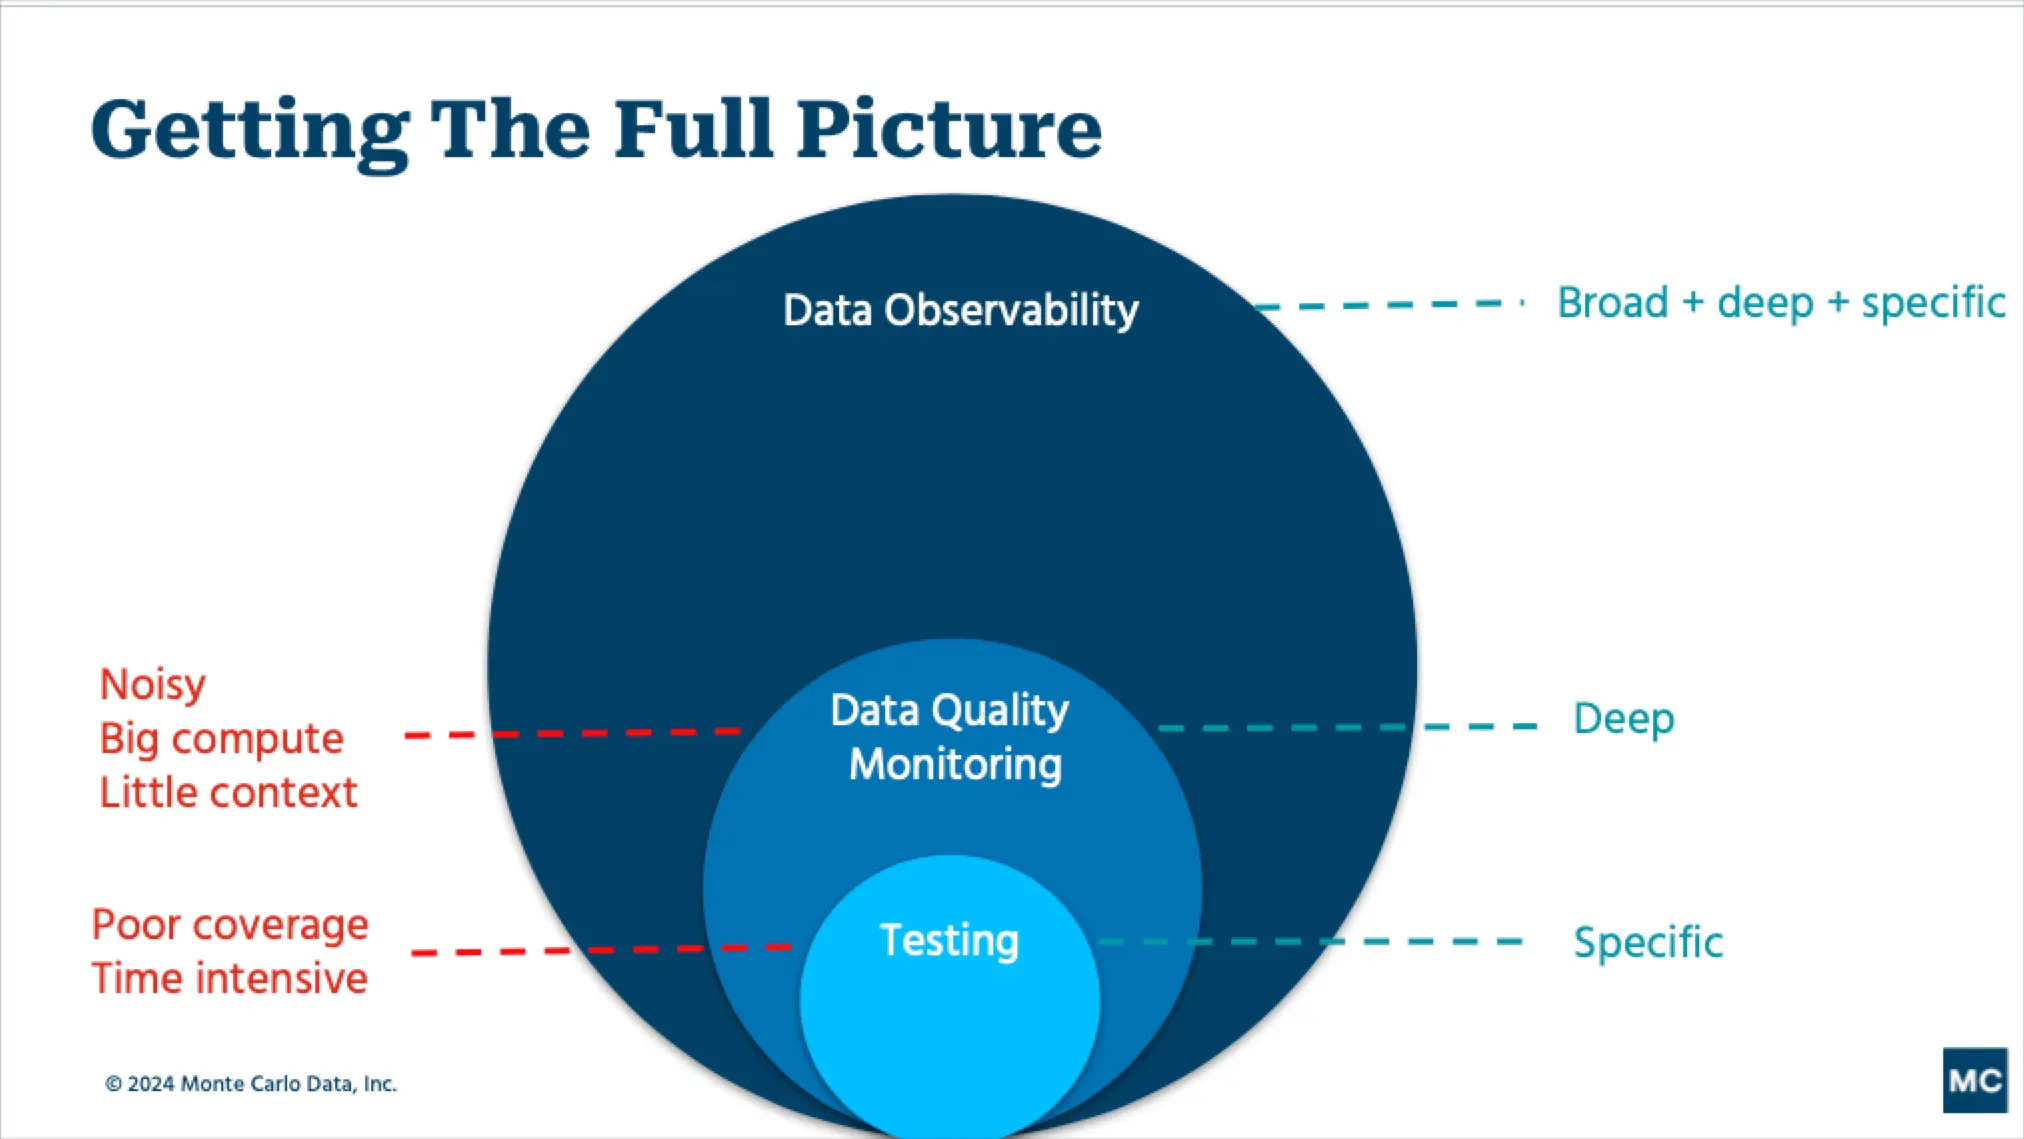 A series of circles that compare data observability to data quality monitoring and data testing.